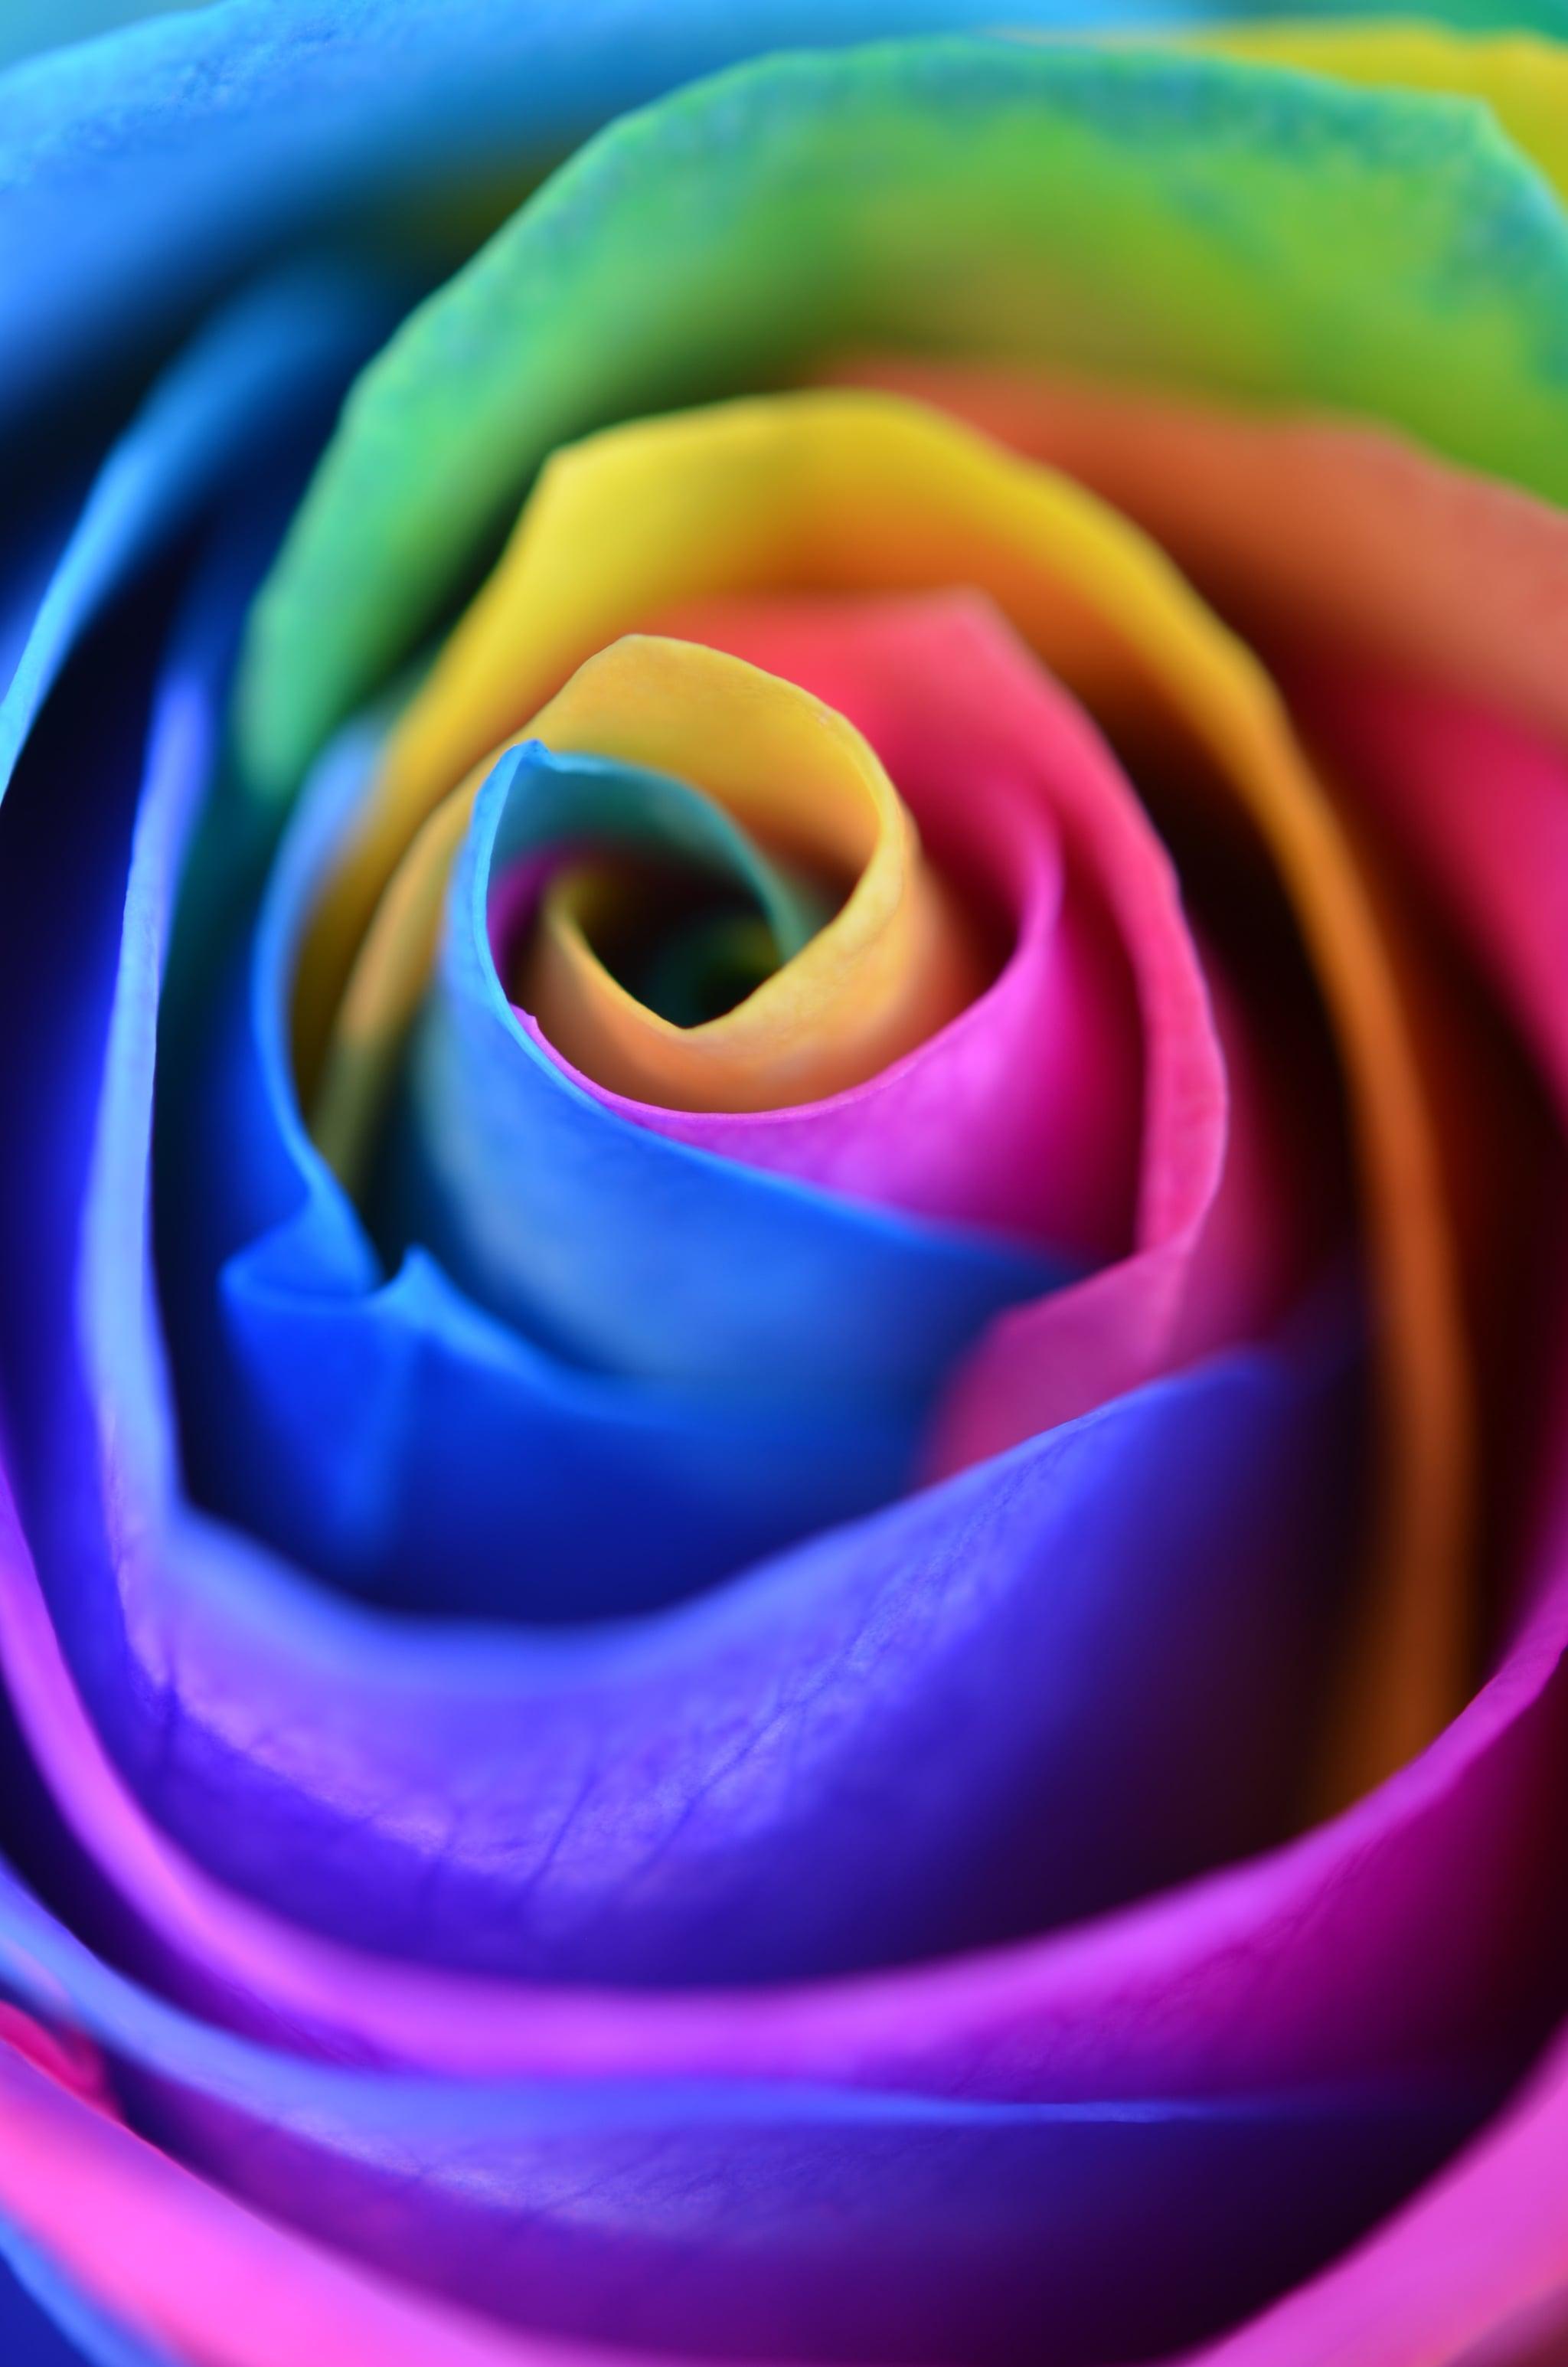 Valentine S Day Wallpaper Rainbow Rose The Dreamiest iPhone